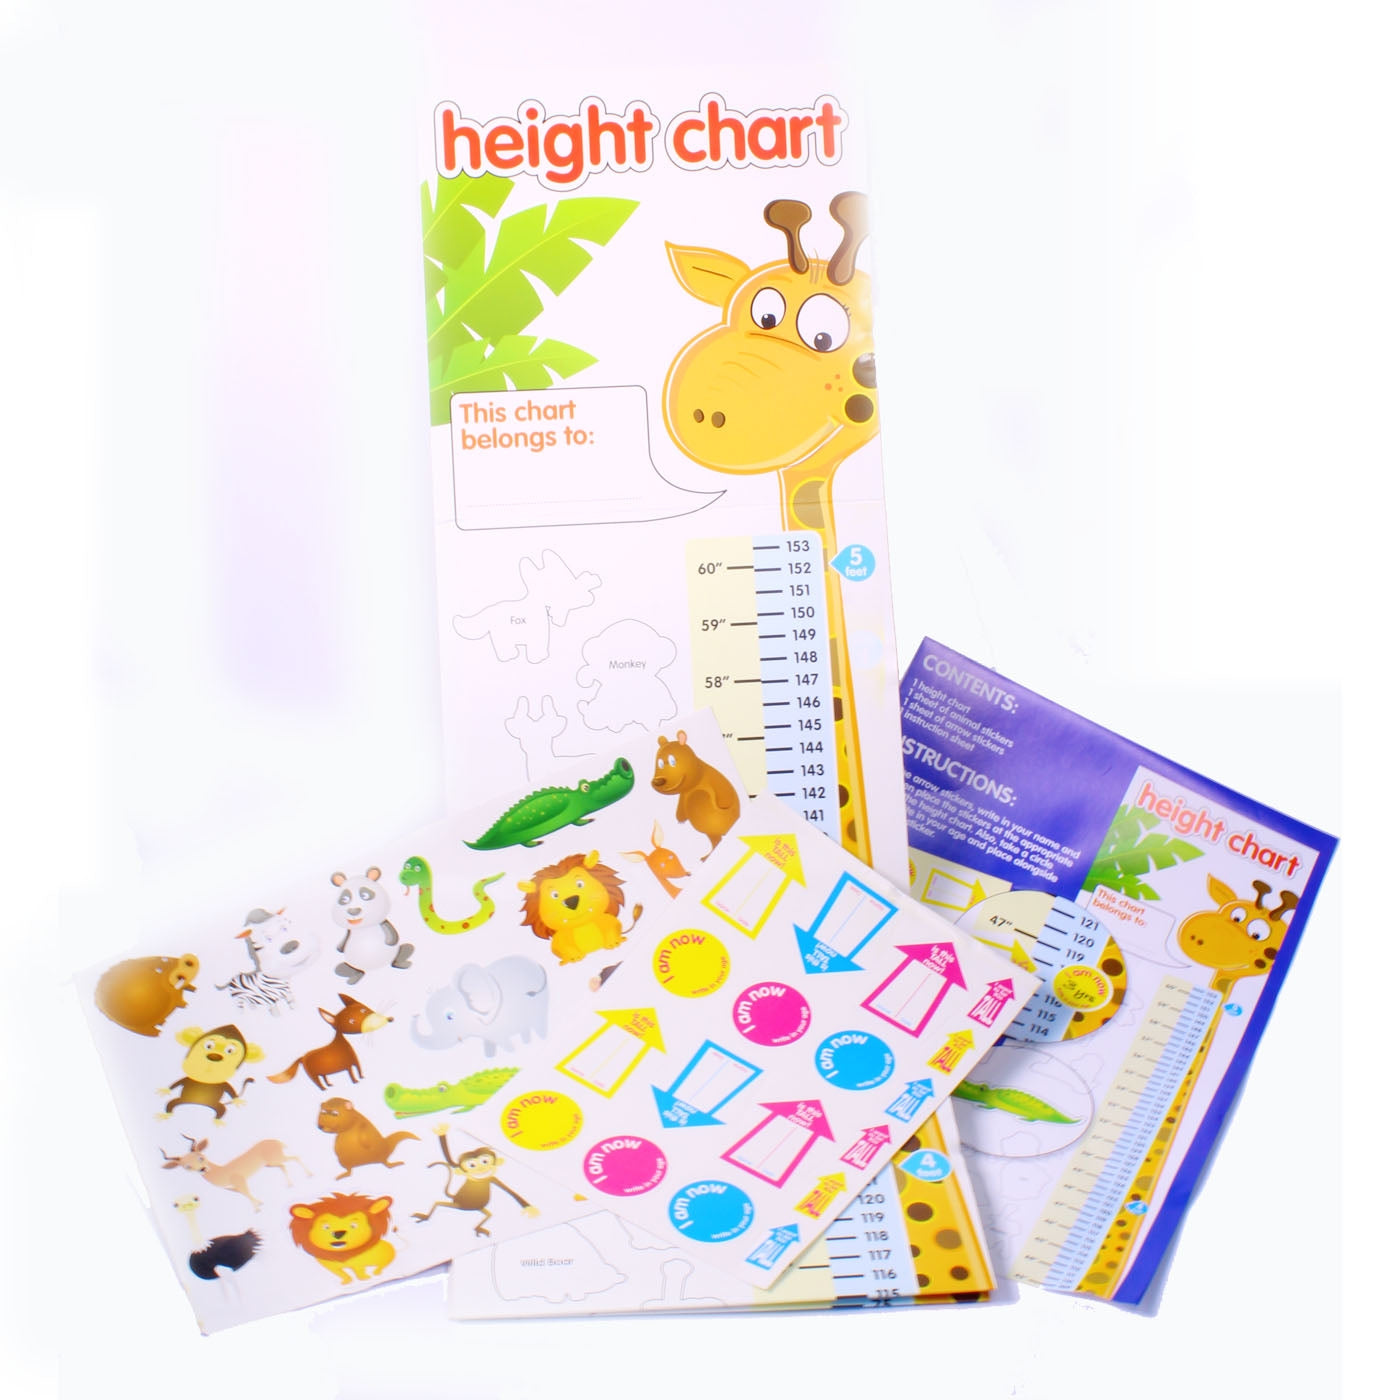 Children's height chart with jungle pictures